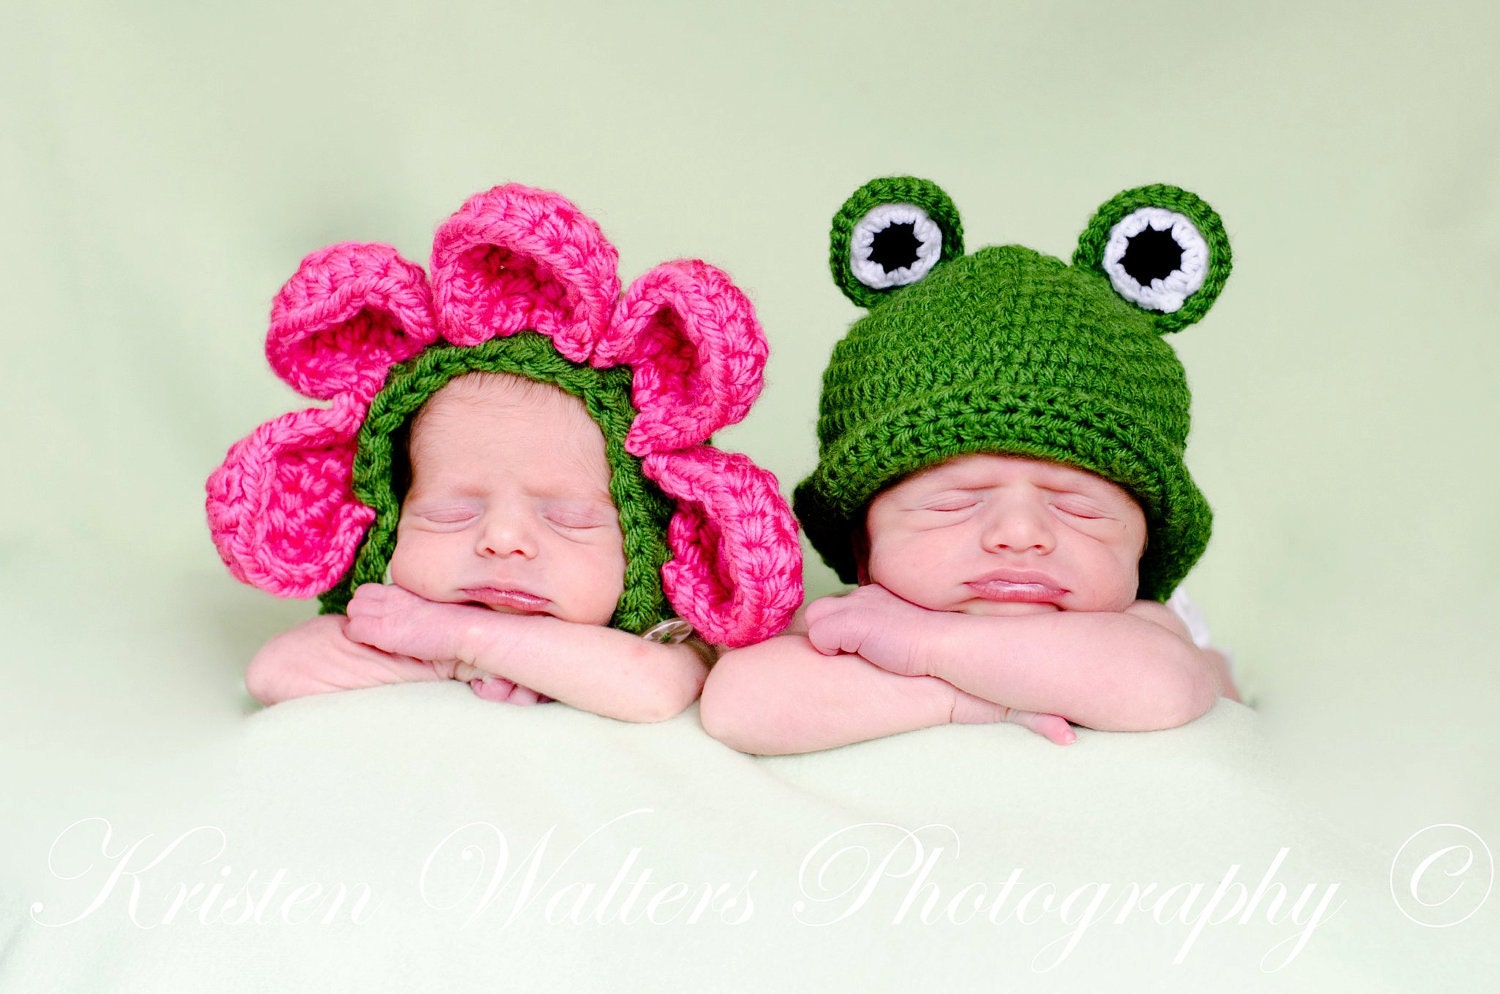 Crochet Princess and Frog Flower Bonnet and Frog Hat Twin Set- Photography prop